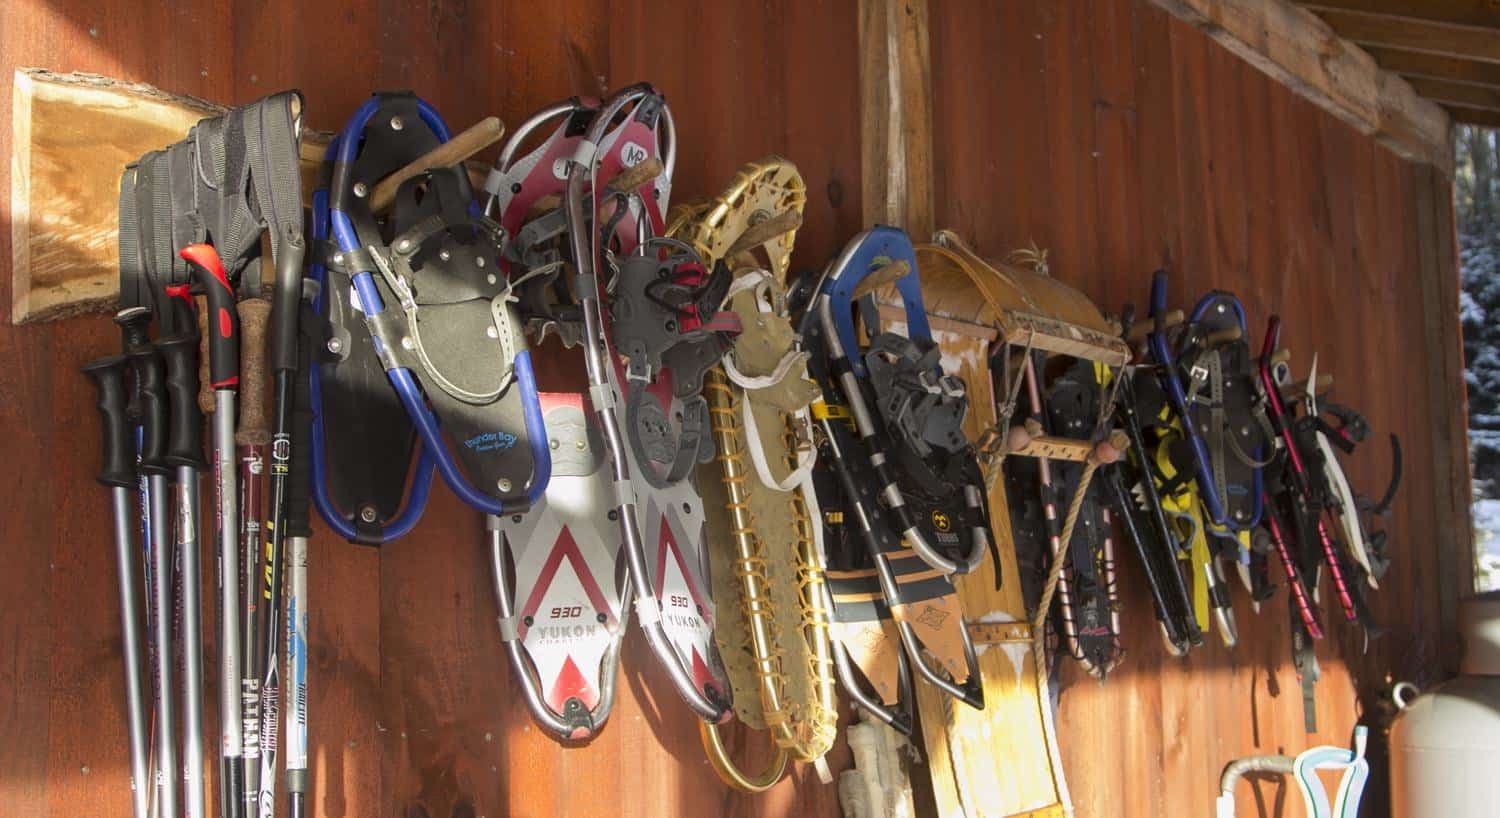 Assorted snowshoes and skis hanging from a  wood cabin wall